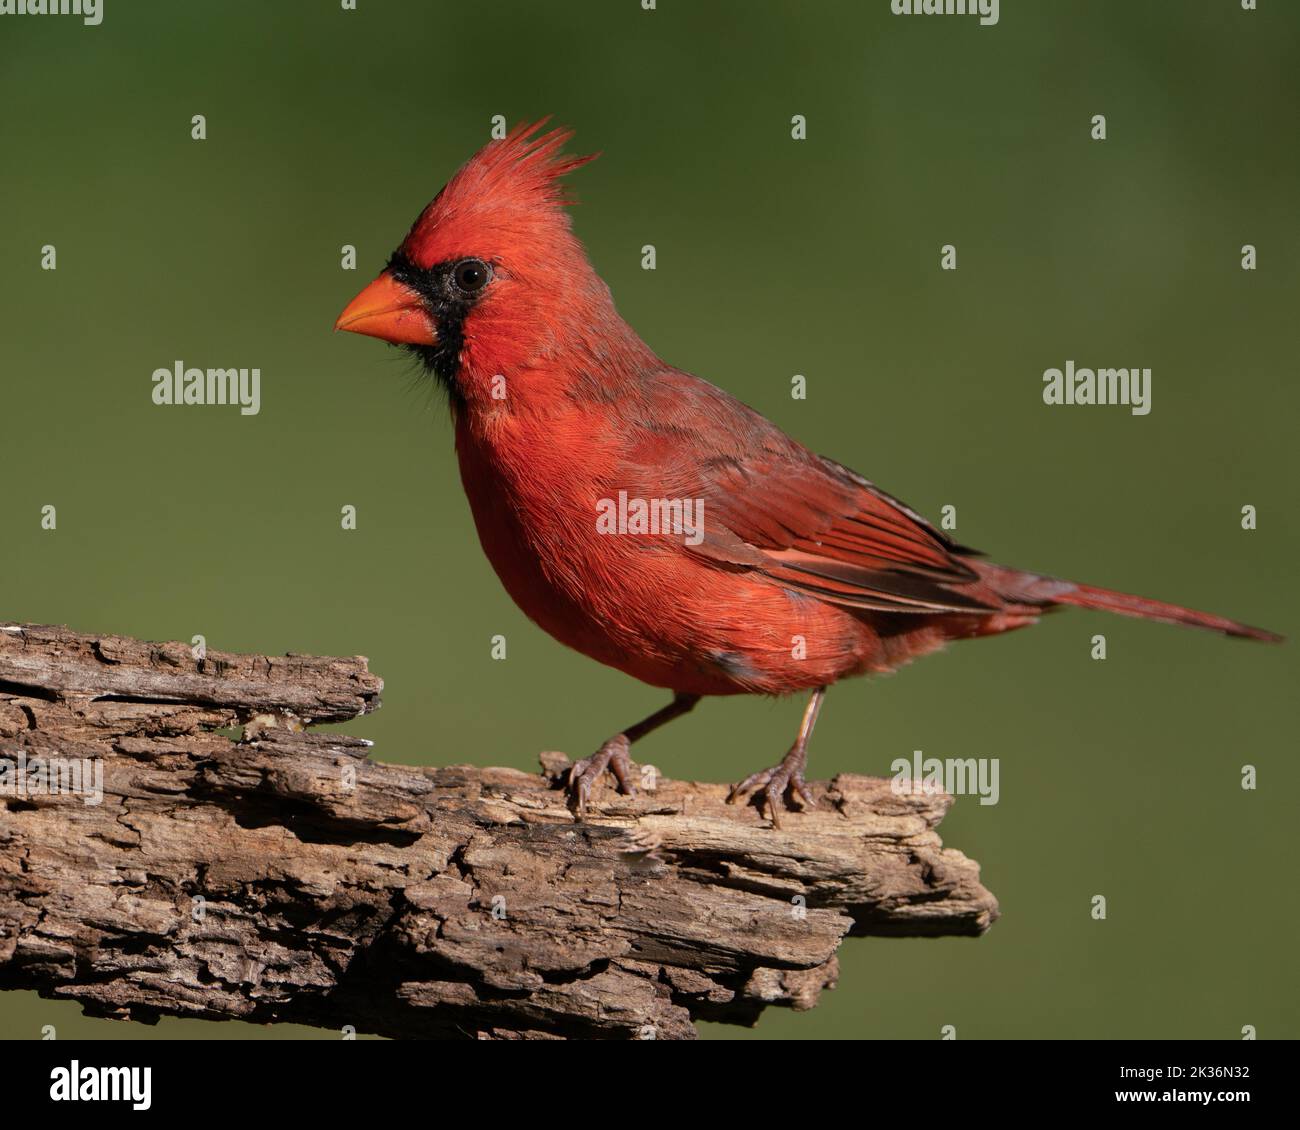 A perched northern cardinal (male). Stock Photo